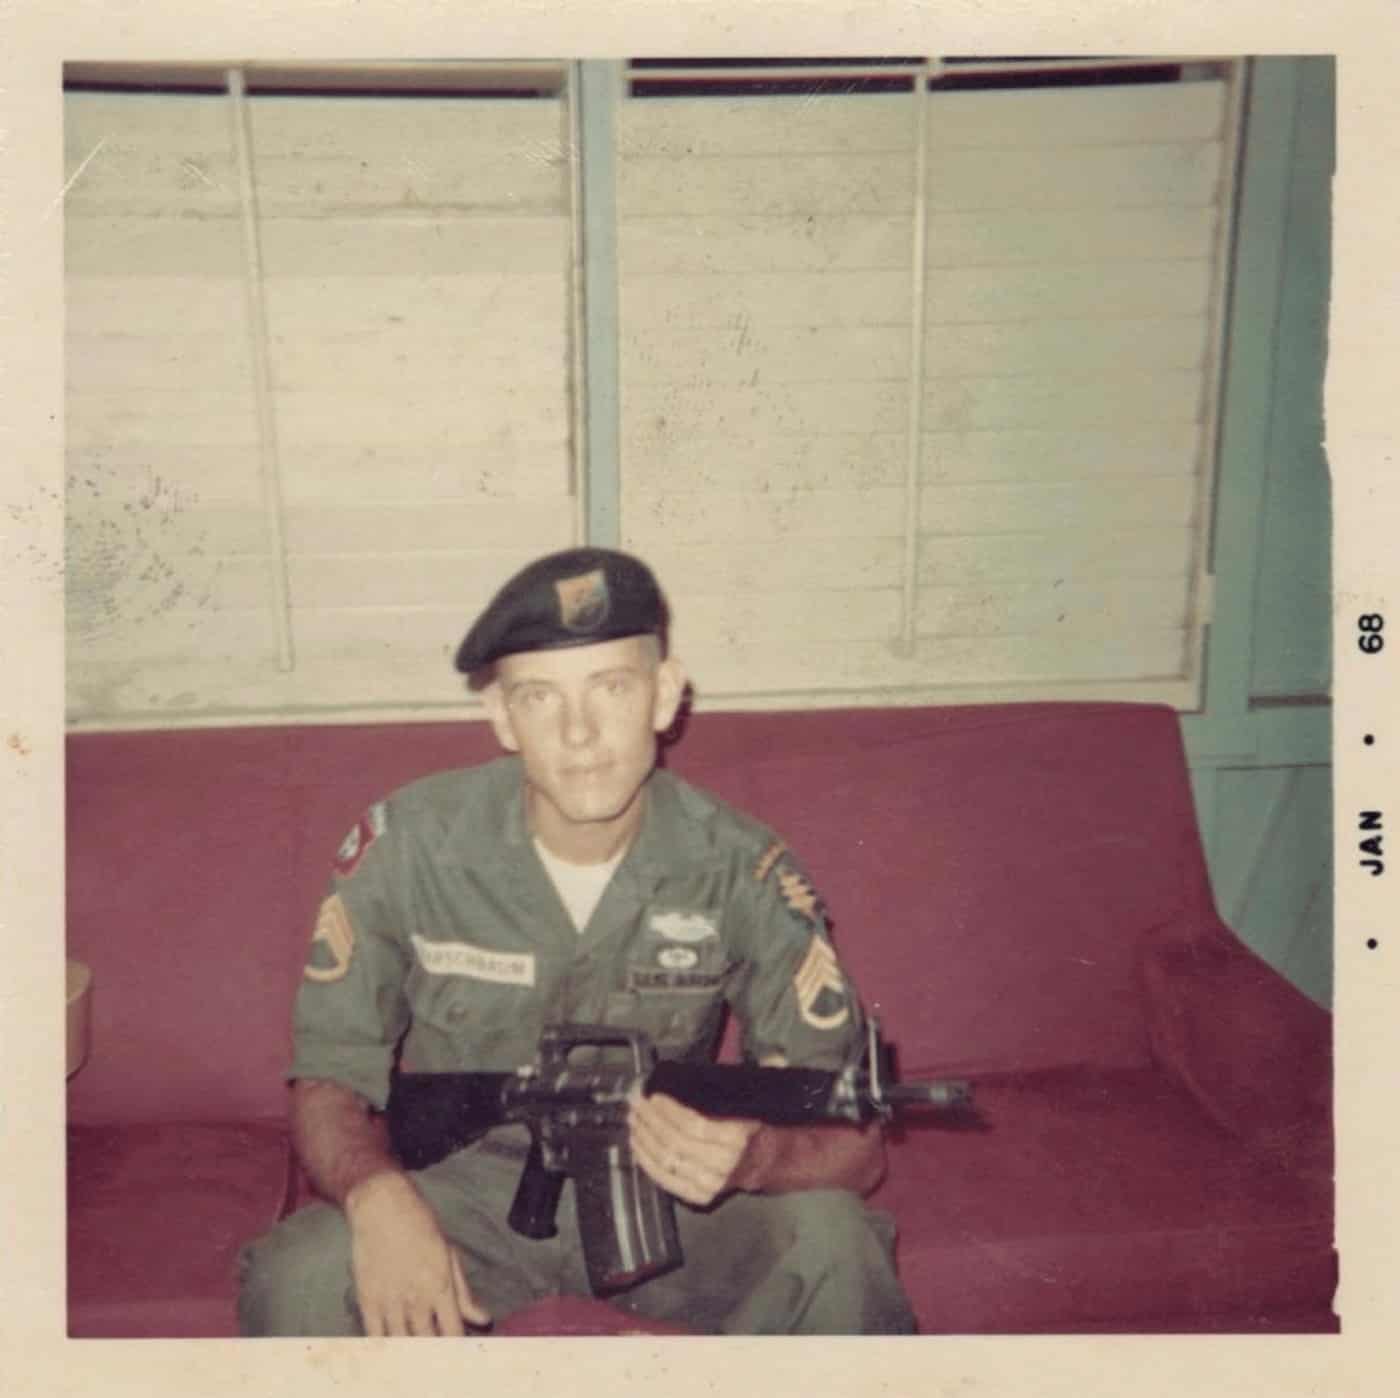 A U.S. Army Staff Sergeant of the 8th Special Forces Group poses for a photograph in the day room of his barracks at Fort Gulick in the Panama Canal Zone while holding a Mattel Marauder in January 1968.